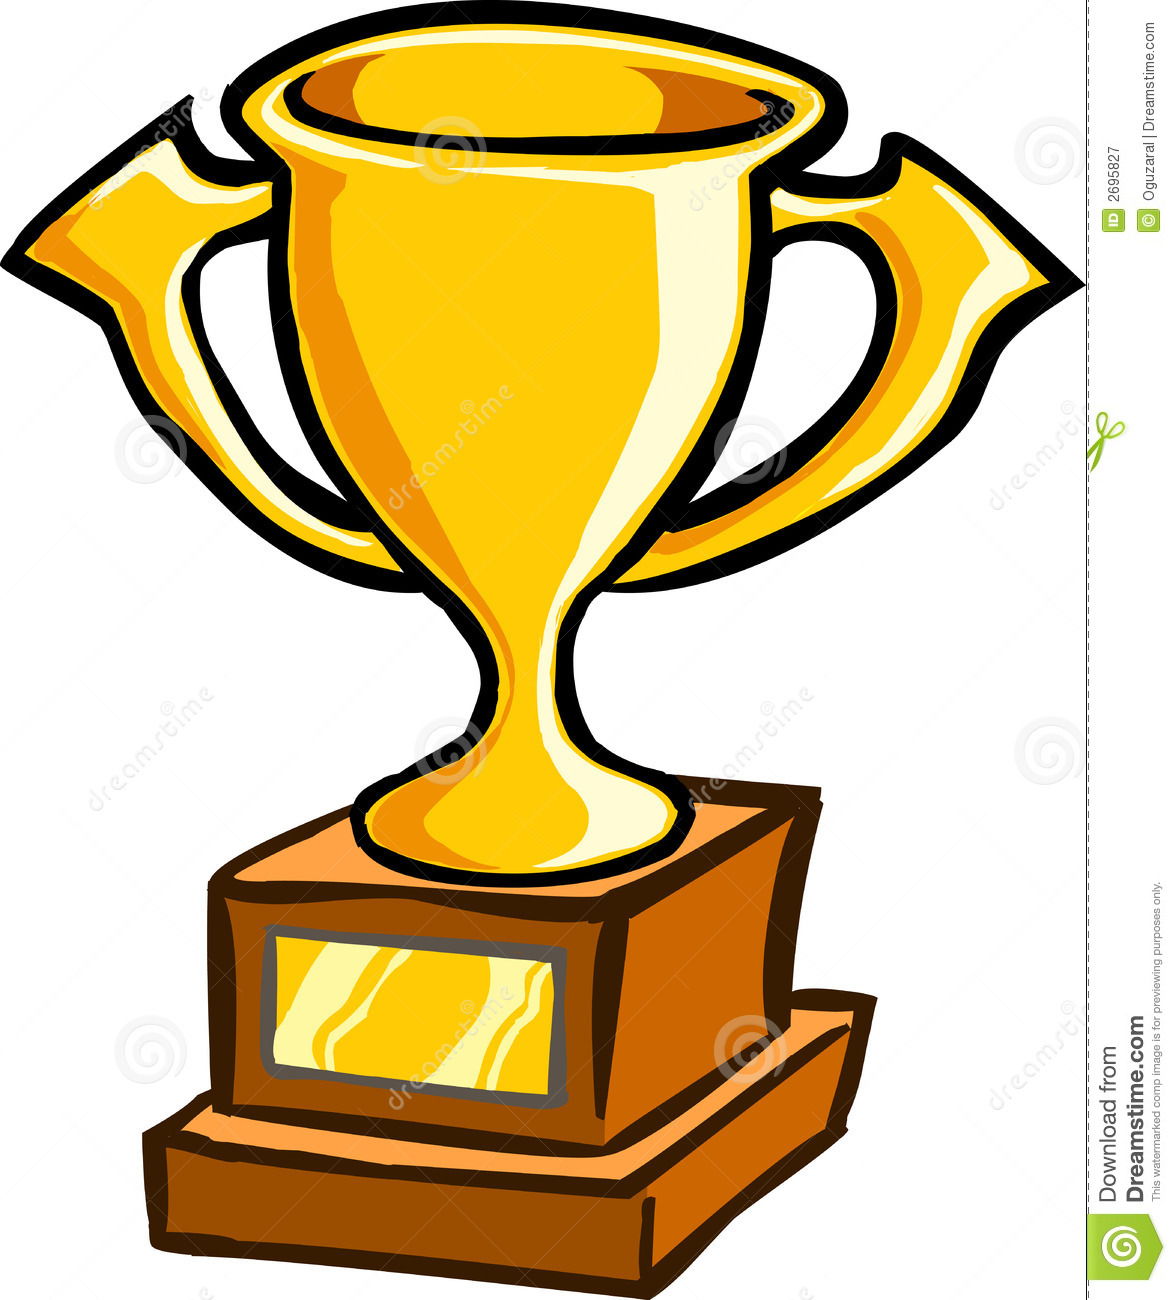 Prize clipart free.